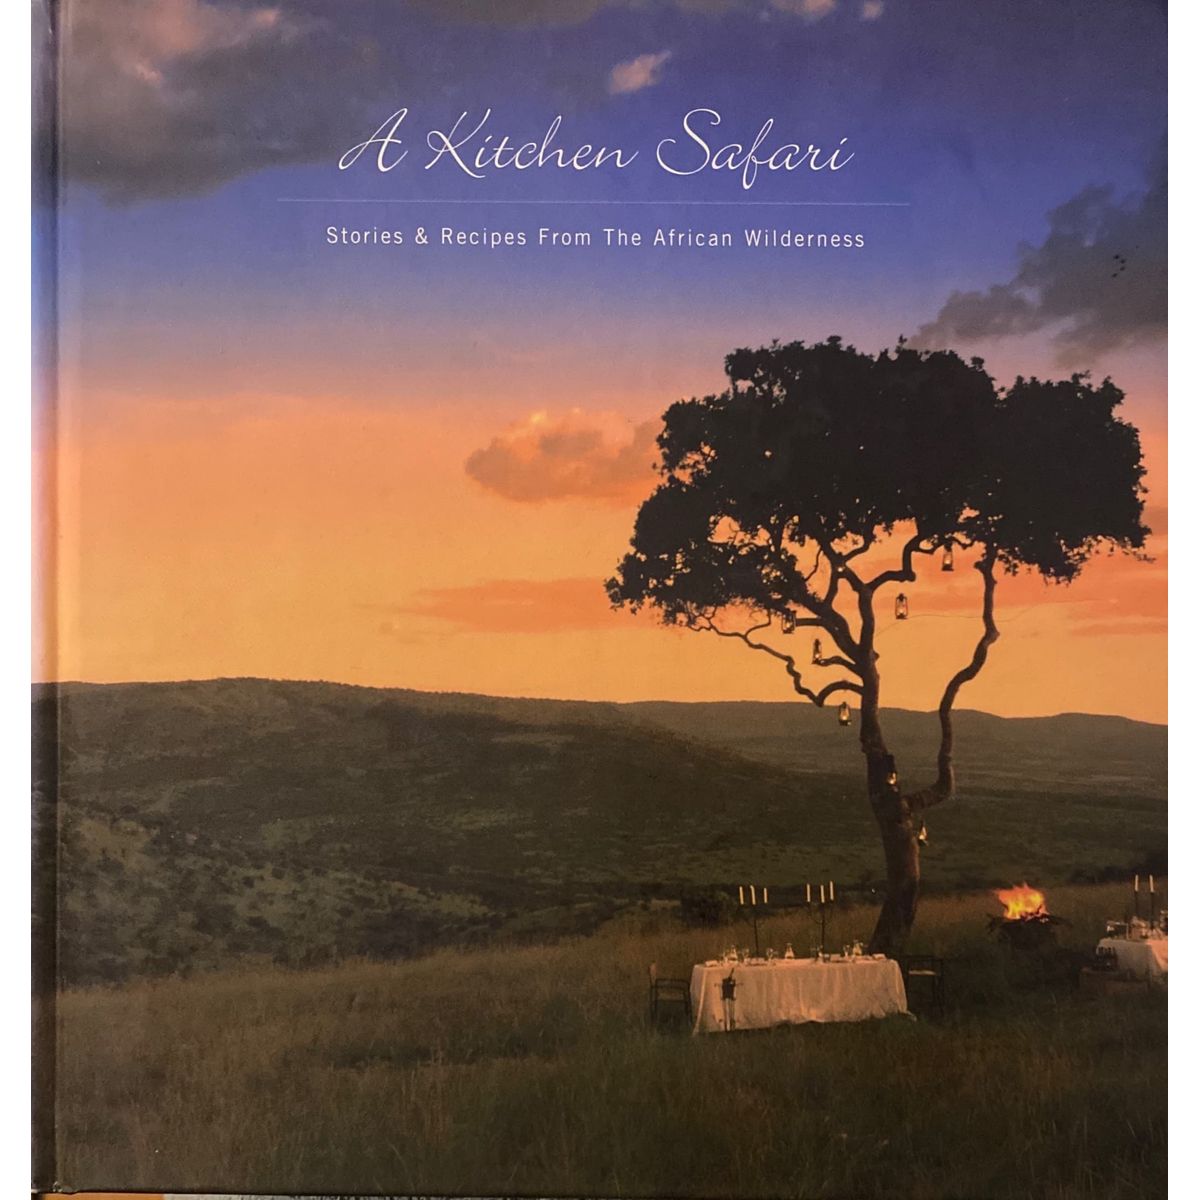 ISBN: 9781770071278 / 177007127X - A Kitchen Safari: Stories & Recipes From the African Wilderness by Yvonne Short [2004]